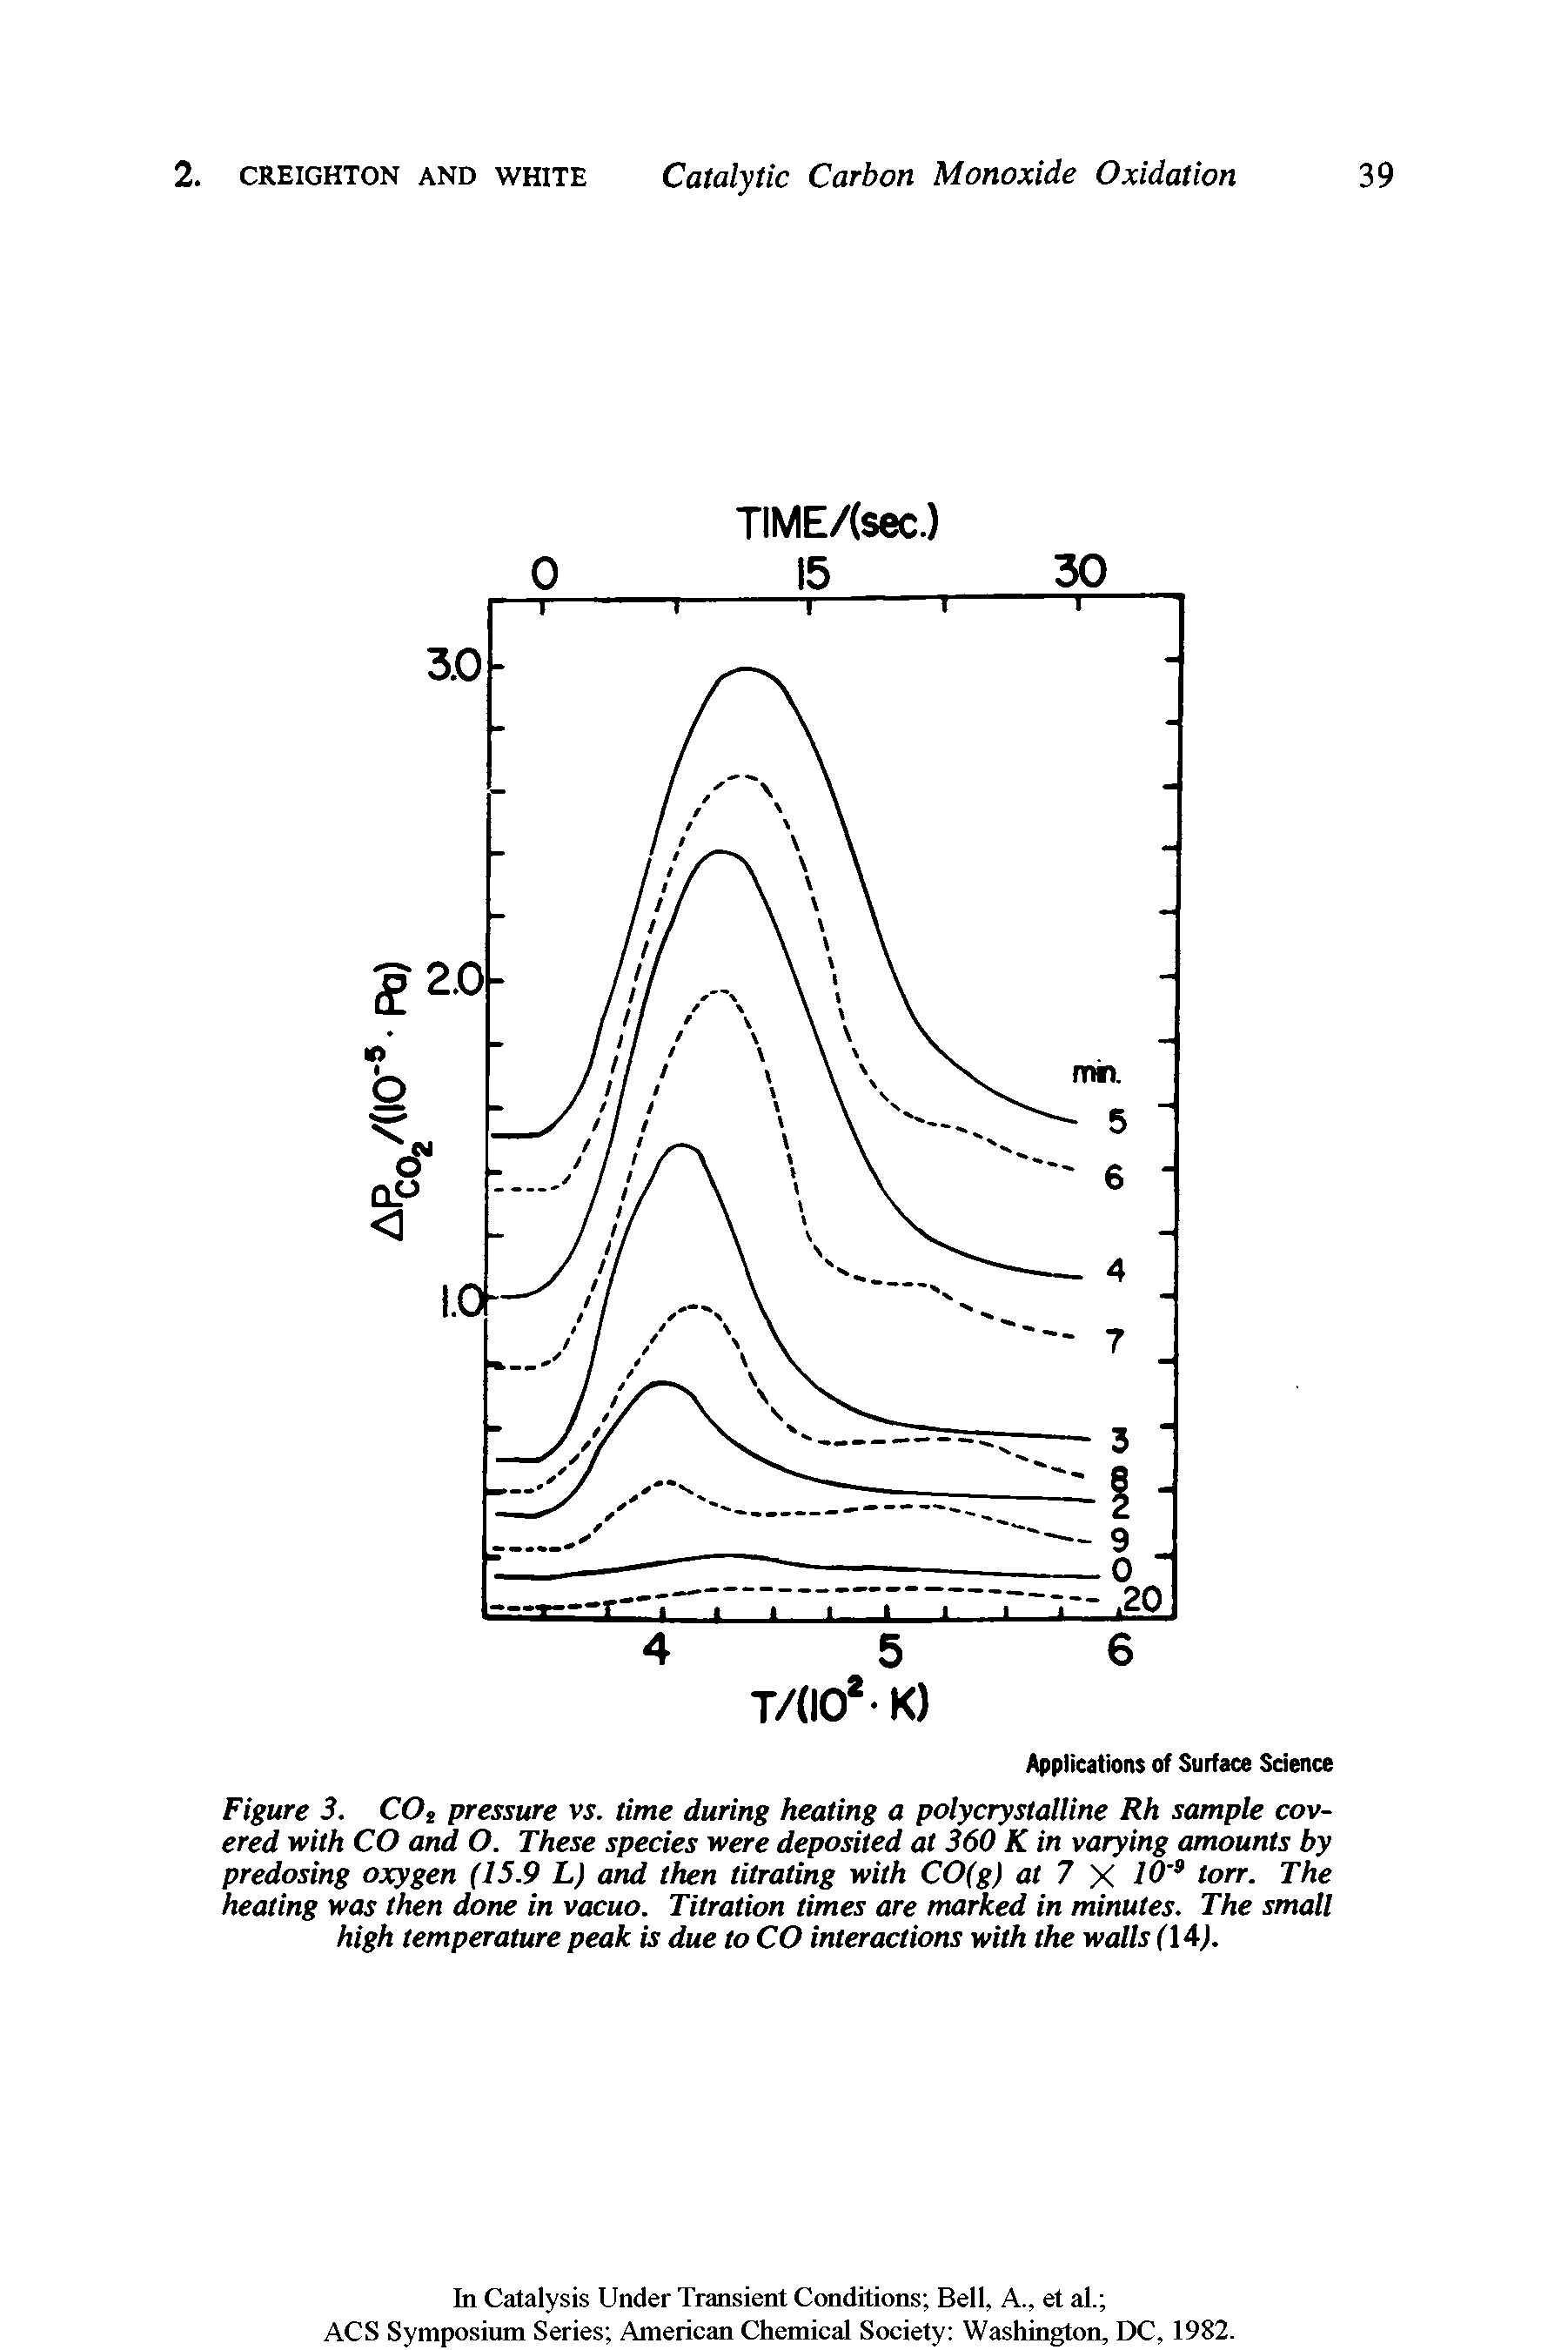 Figure 3. COs pressure vs. time during heating a polycrystalline Rh sample covered with CO and O. These species were deposited at 360 K in varying amounts by predosing oxygen (15.9 L) and then titrating with CO(g) at 7 X 10 3 torr. The heating was then done in vacuo. Titration times are marked in minutes. The small high temperature peak is due to CO interactions with the walls (14).